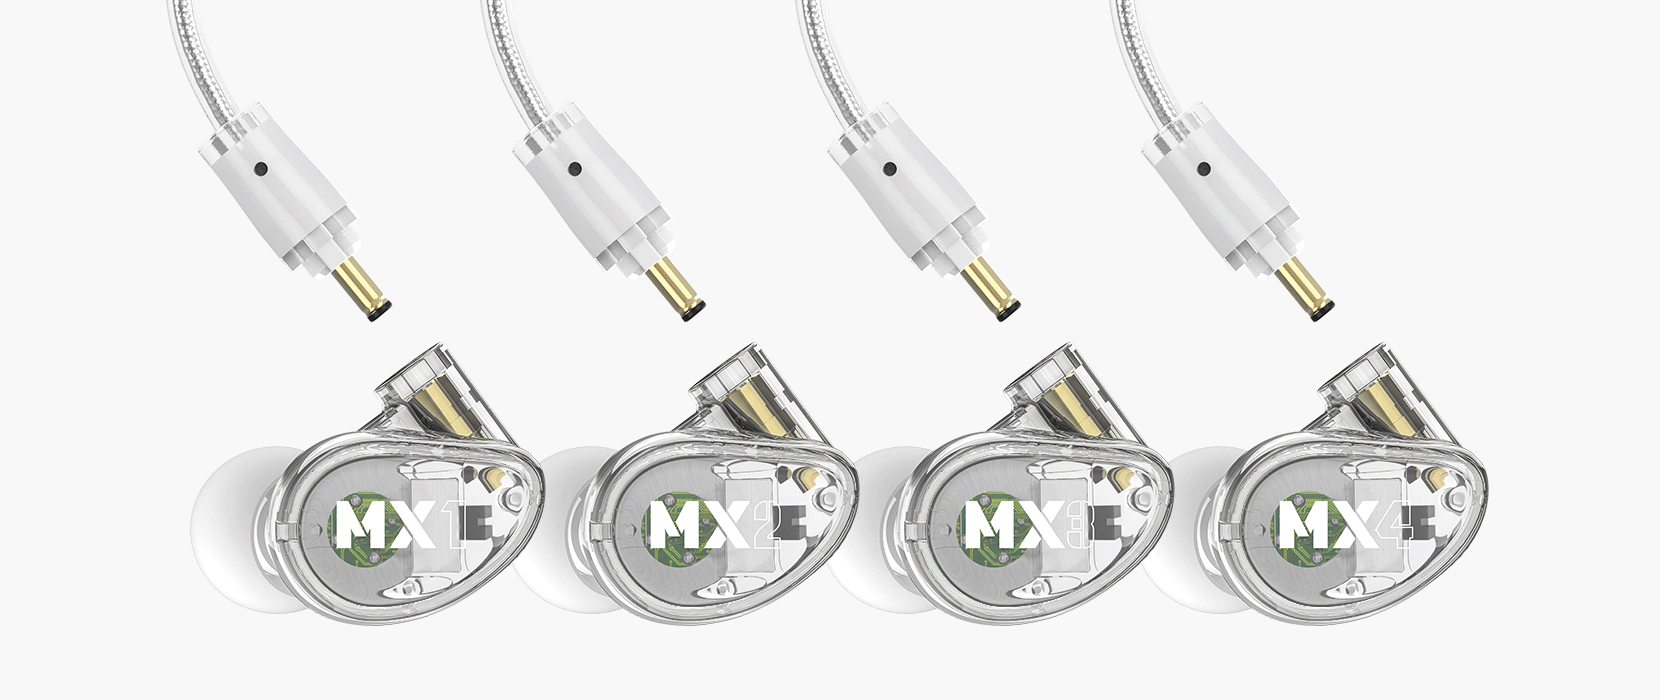 Five retractable tape measures with the lettering "mxe" printed on a clear window, paired with five auxiliary audio cables featuring metal-tipped plugs, arranged alternately on a white background.